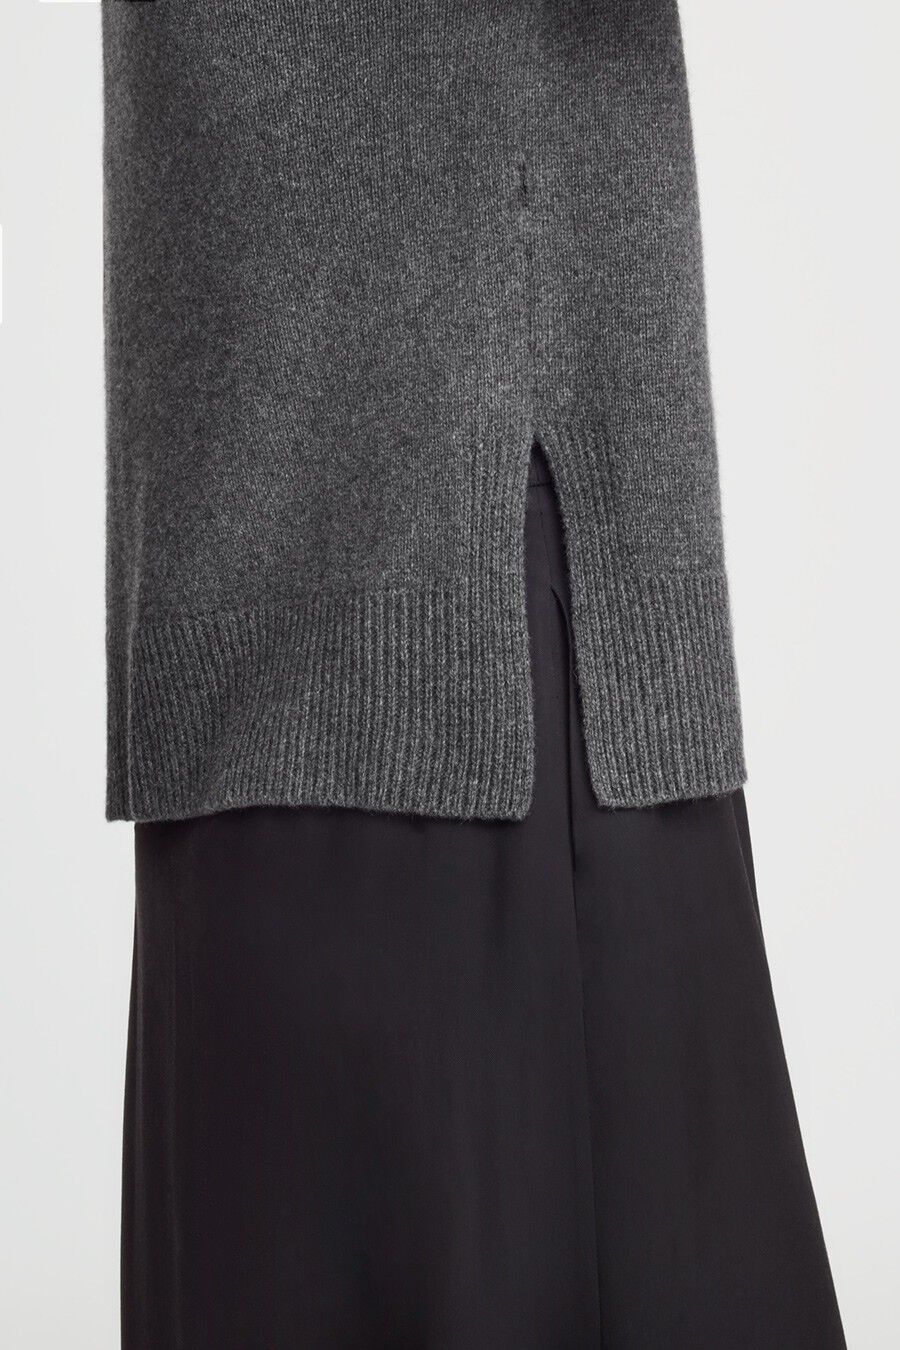 Close-up of a sweater over pants with a slit detail at the hem.